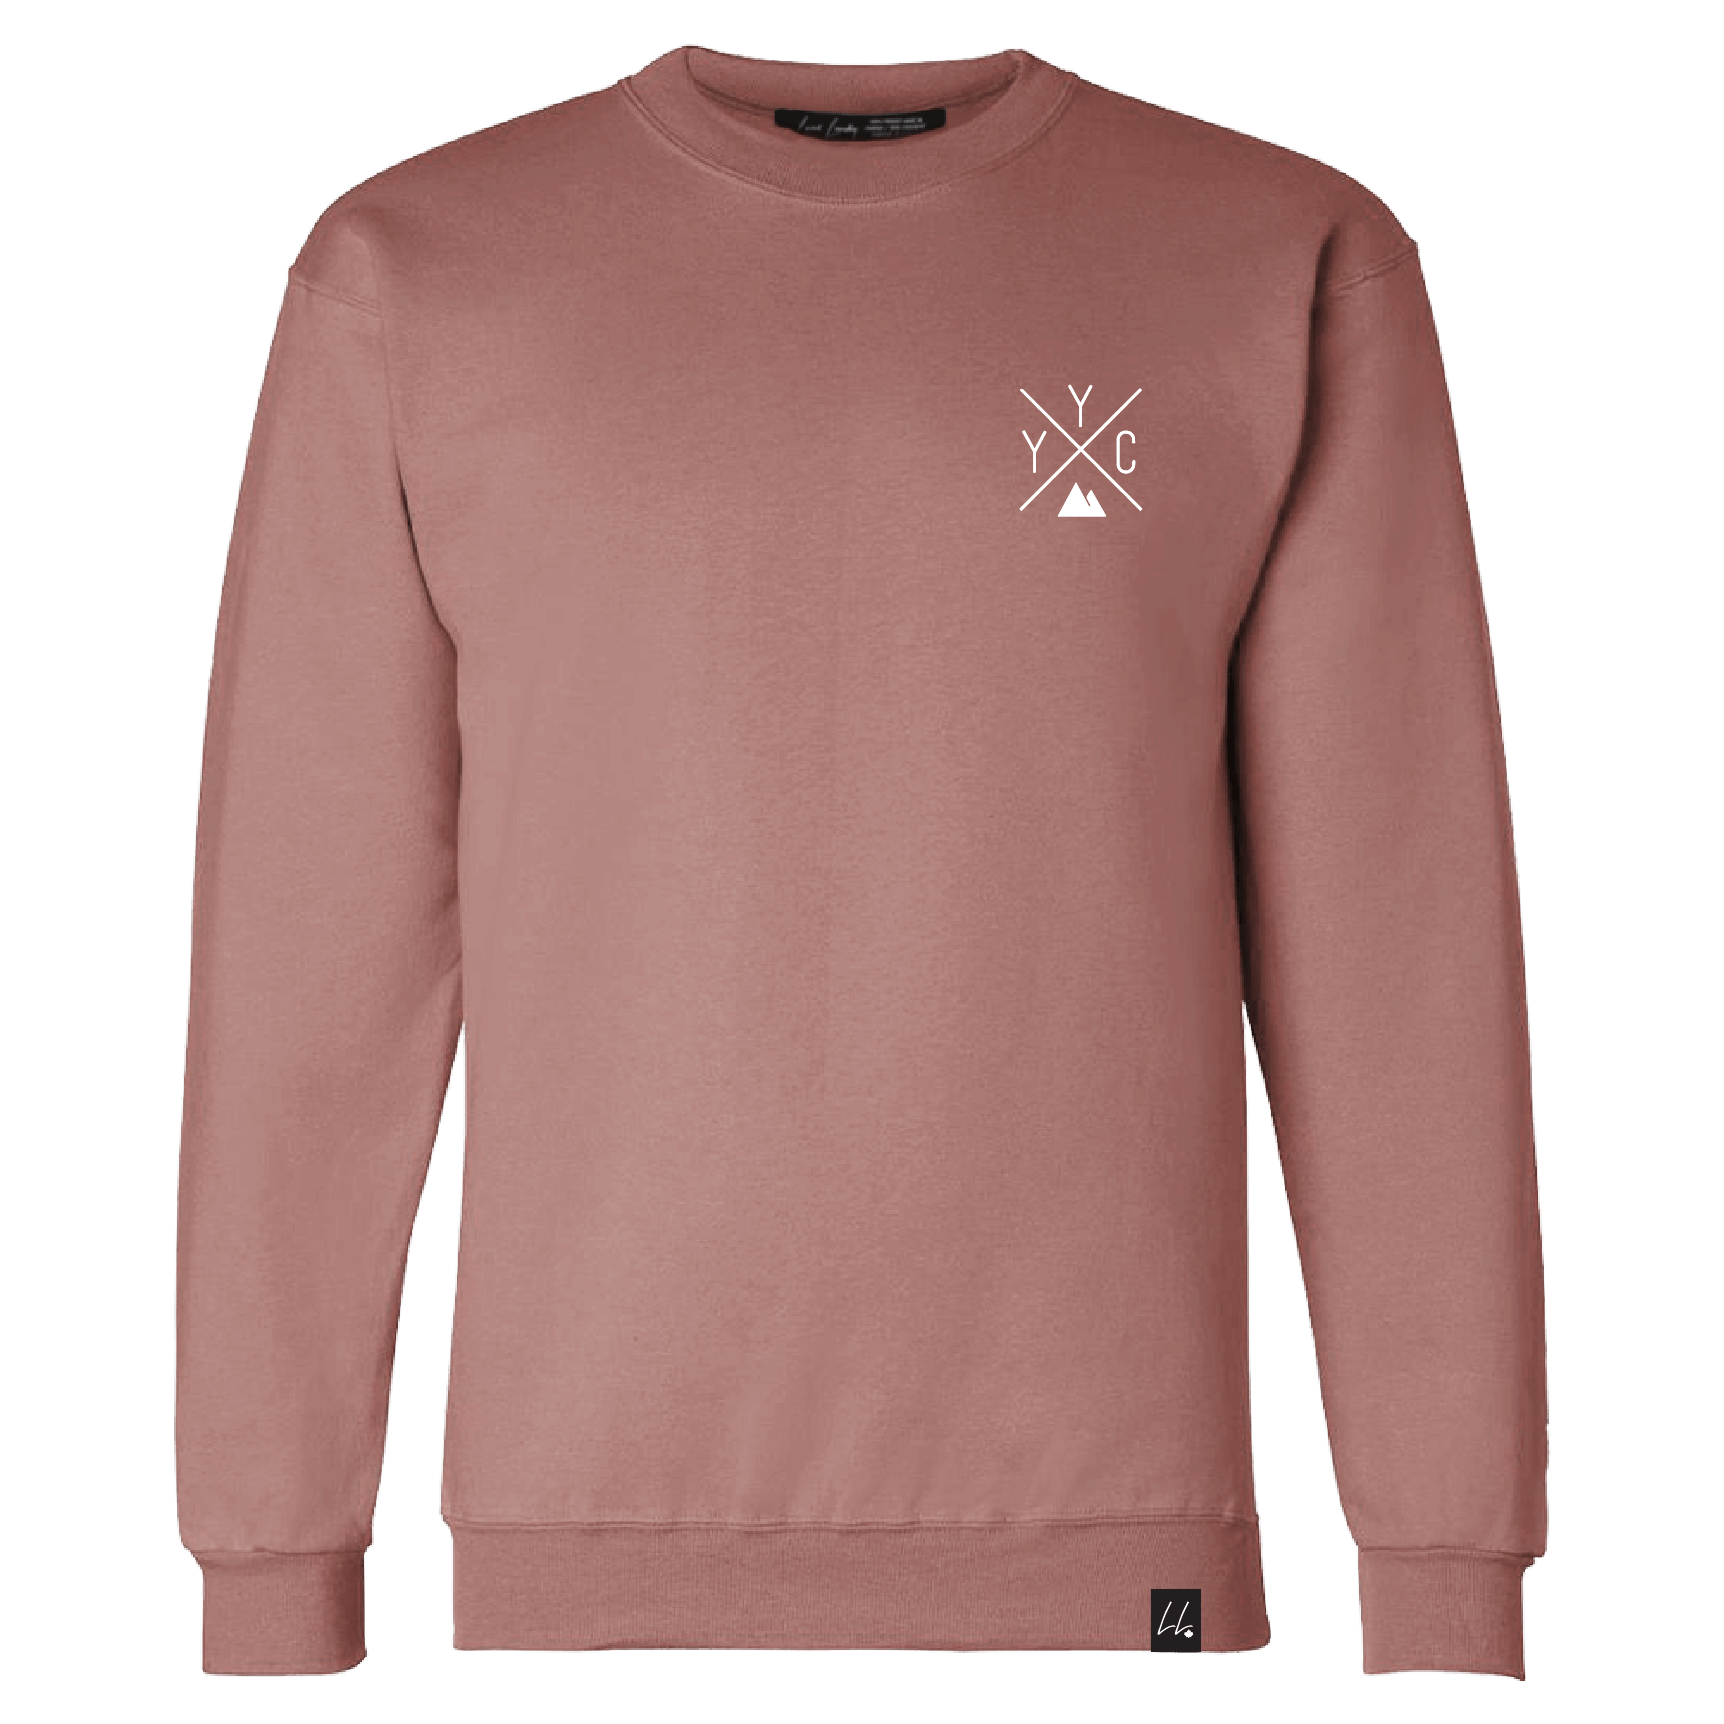 Made in Canada using sustainable materials, this Dusty Rose sweater features the exclusive Local Laundry YYC design sewn into the left chest of the sweater.